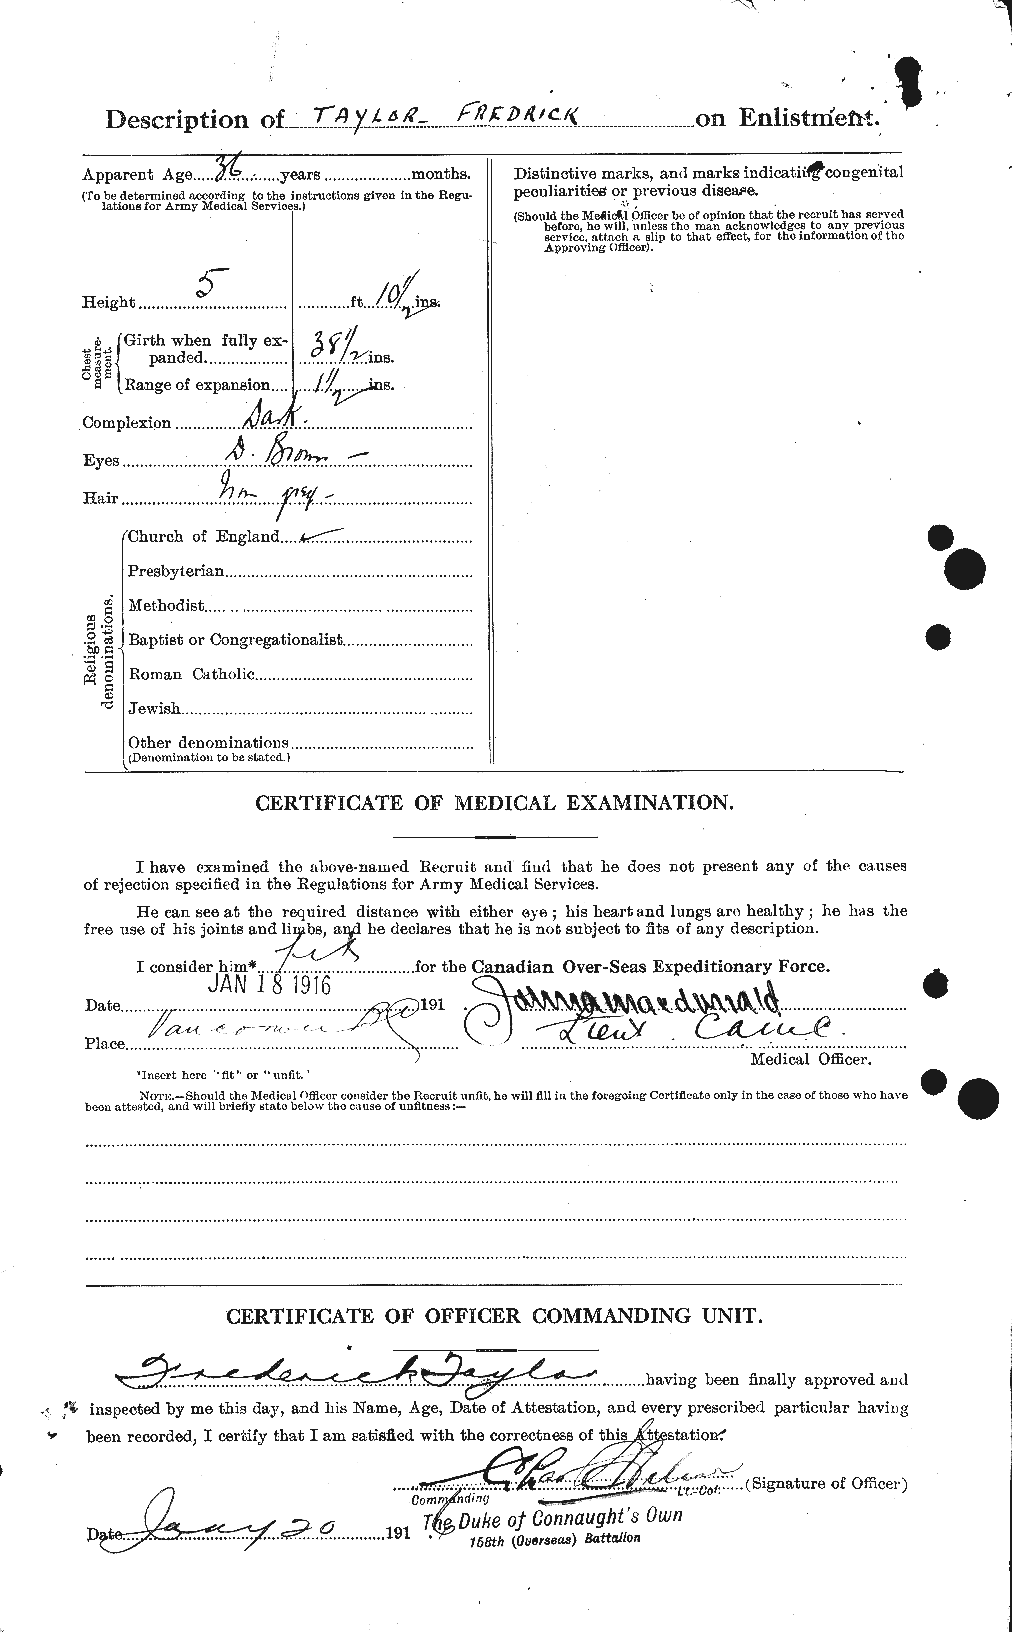 Personnel Records of the First World War - CEF 625779b